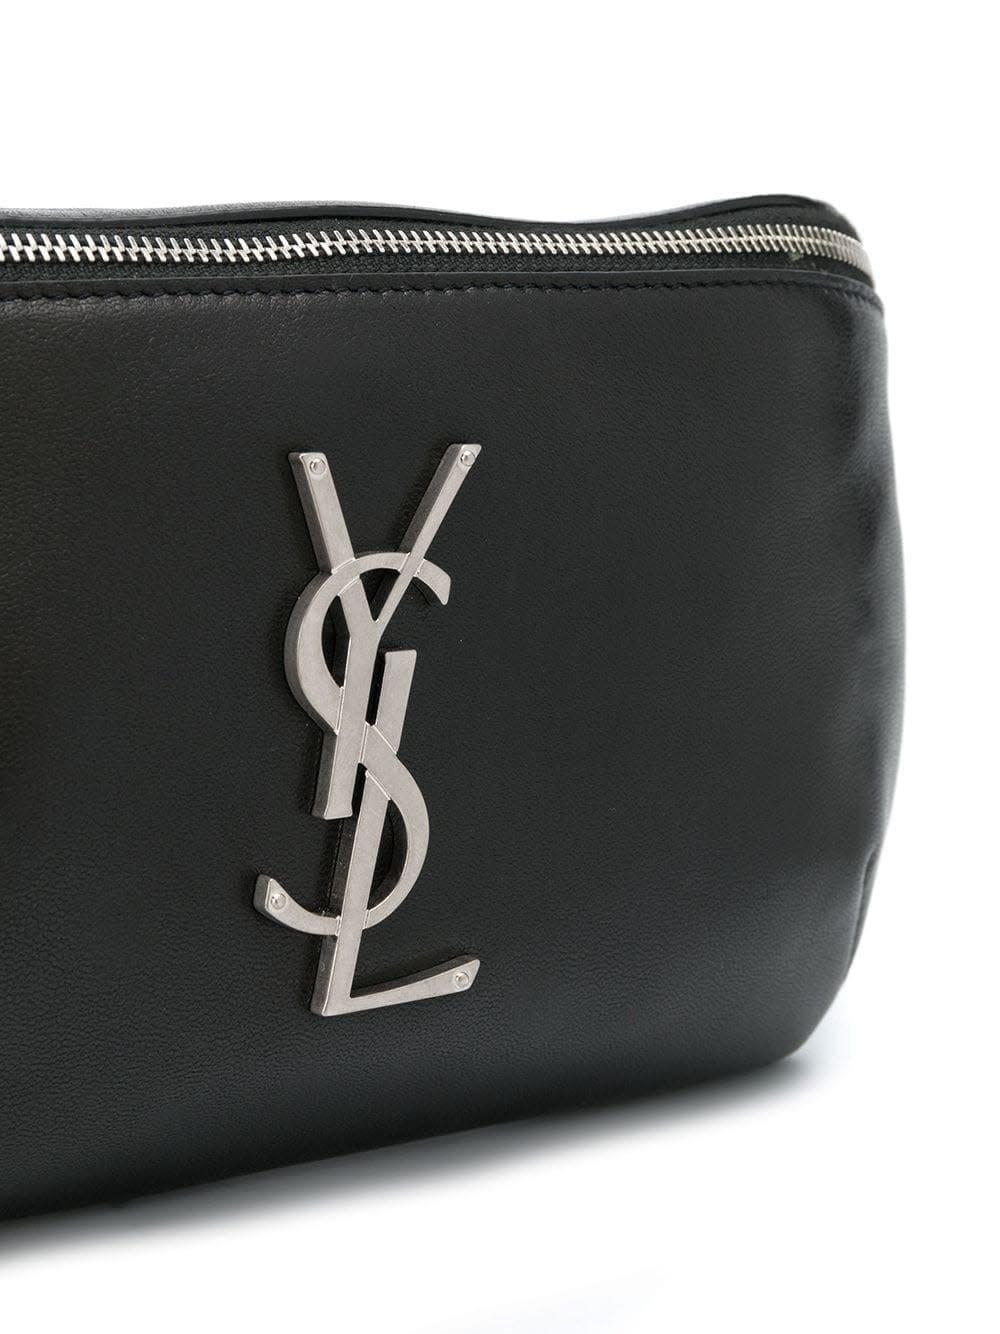 Made from supple leather and boasting the brand's famous YSL motif, this belt bag from Saint Laurent is simplistic and functional. Featuring an adjustable fastening, a front zip compartment, a front logo plaque and silver-tone hardware.

COLOR: